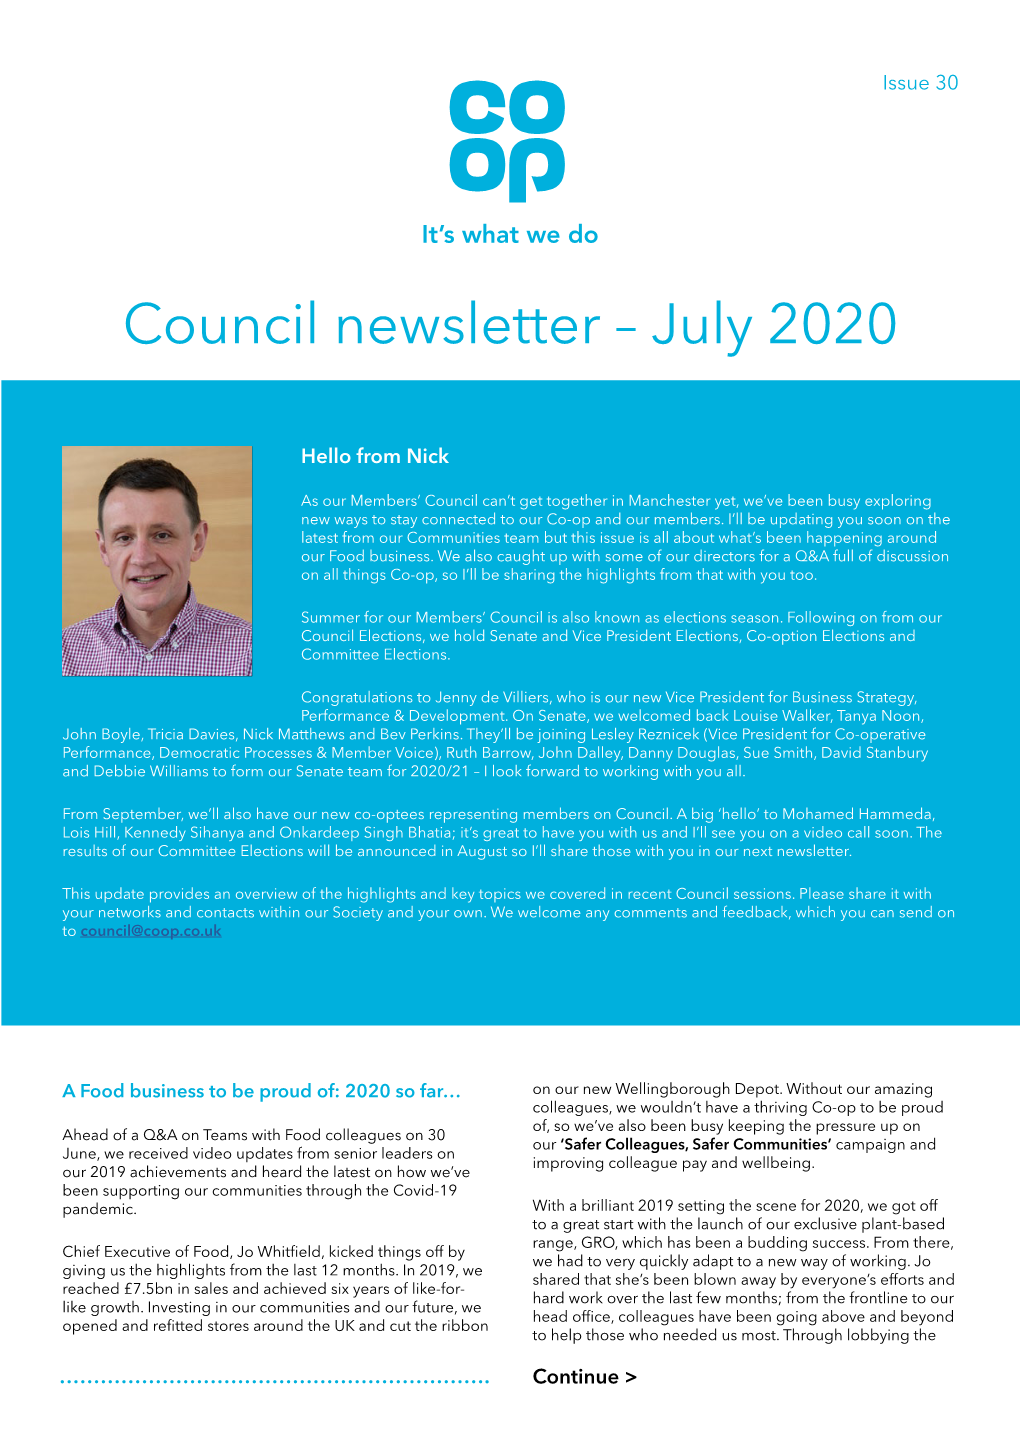 Council Newsletter – July 2020